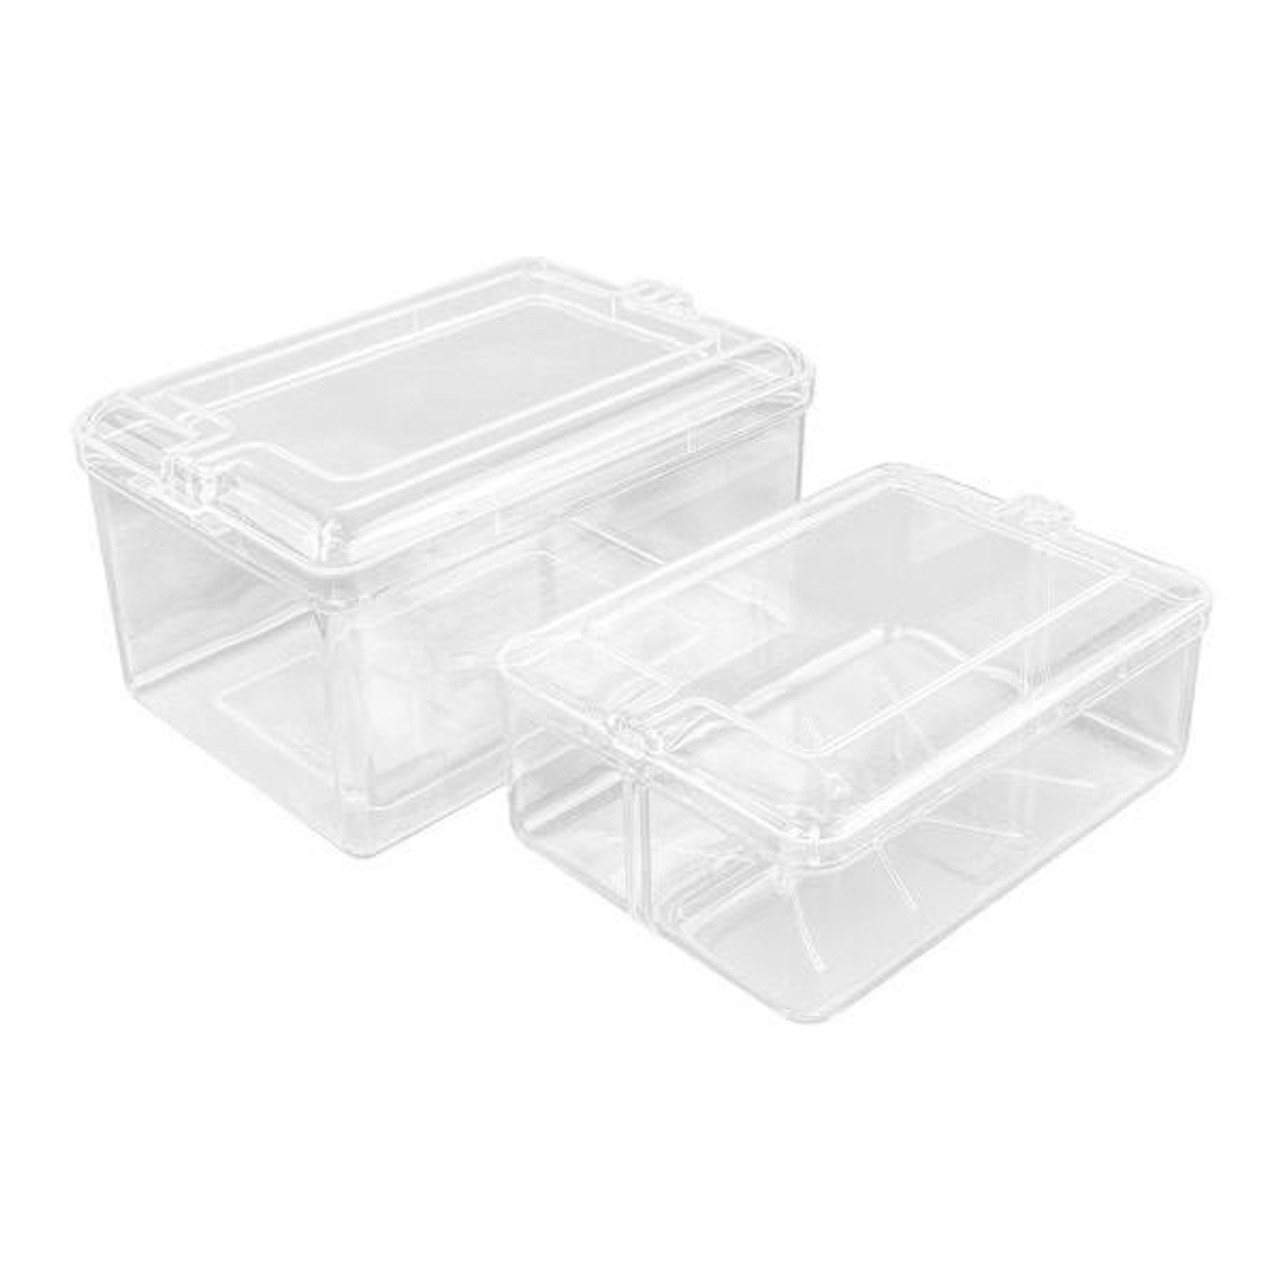 10 oz PP Container MTP Packaging